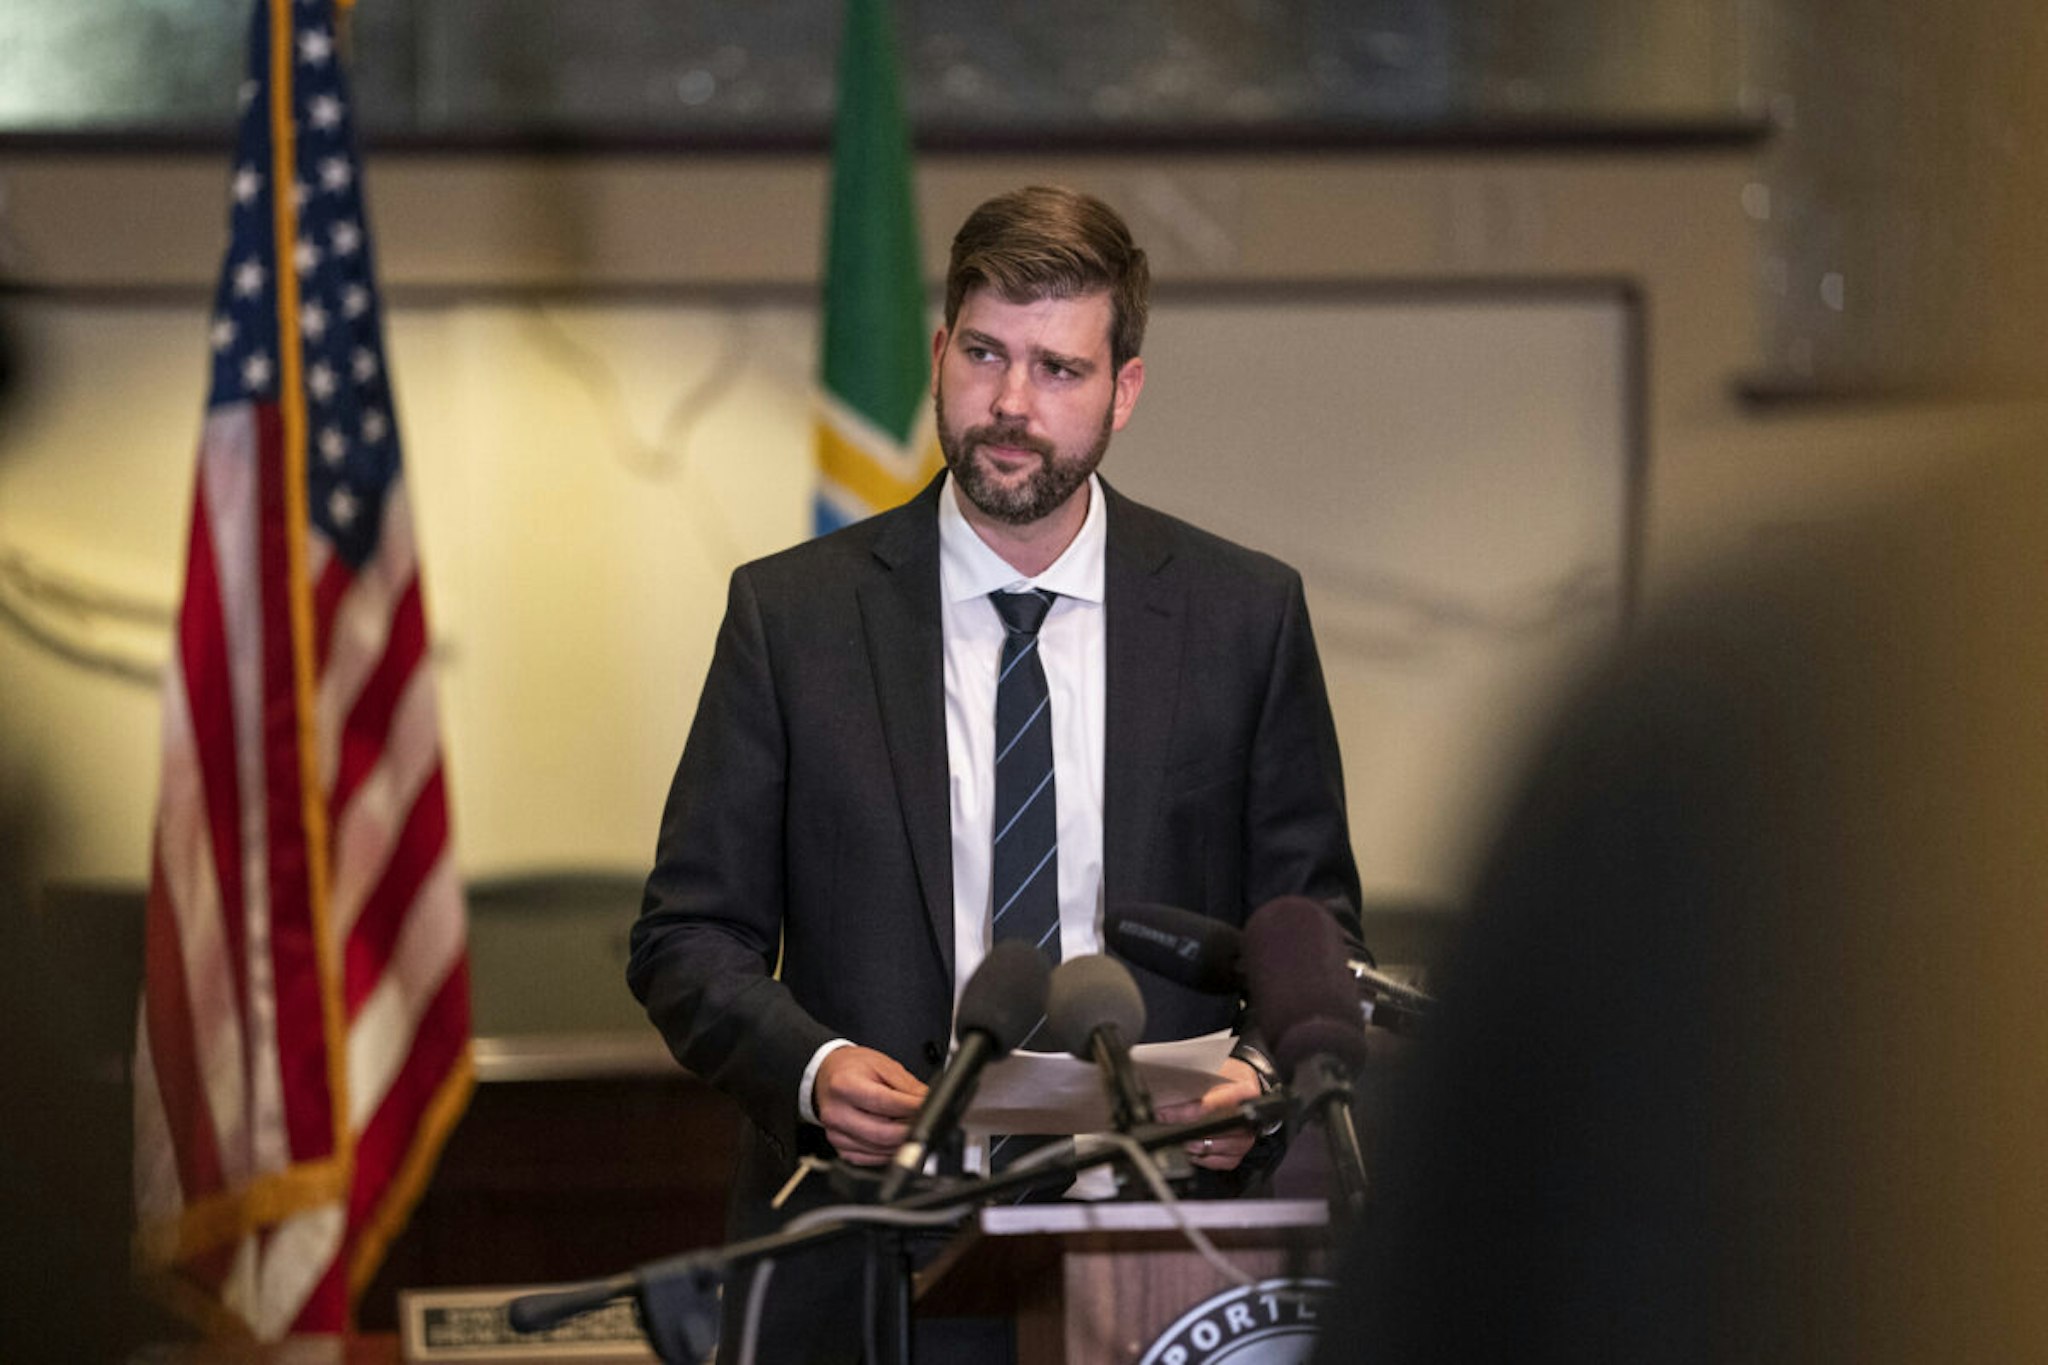 PORTLAND, OR - AUGUST 30: Mike Schmidt, Multnomah County district attorney, speaks to the media at City Hall on August 30, 2020 in Portland, Oregon. A man was fatally shot Saturday night as a Pro-Trump rally clashed with Black Lives Matter protesters in downtown Portland.